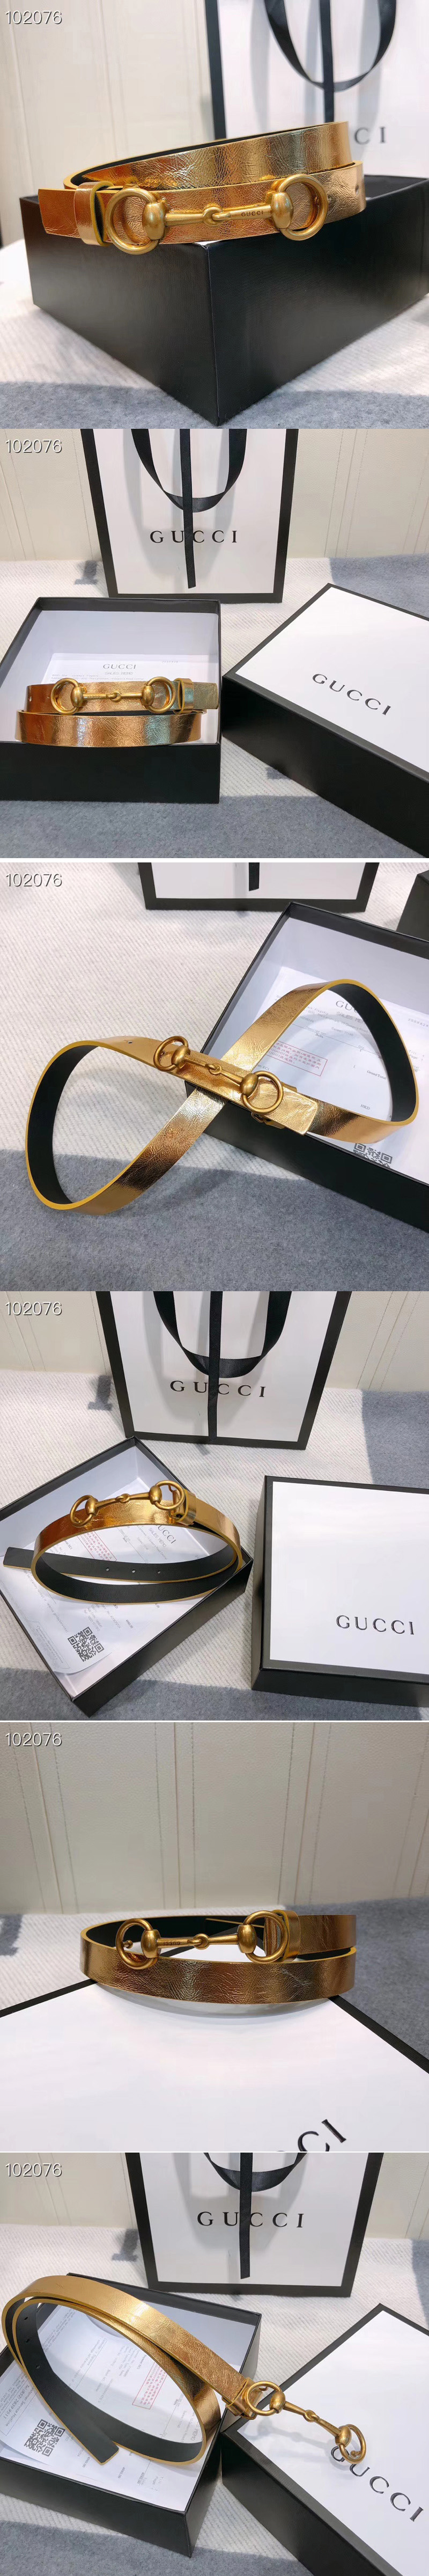 Replica Women's Gucci 230127 Leather belt 2cm in Gold Leather